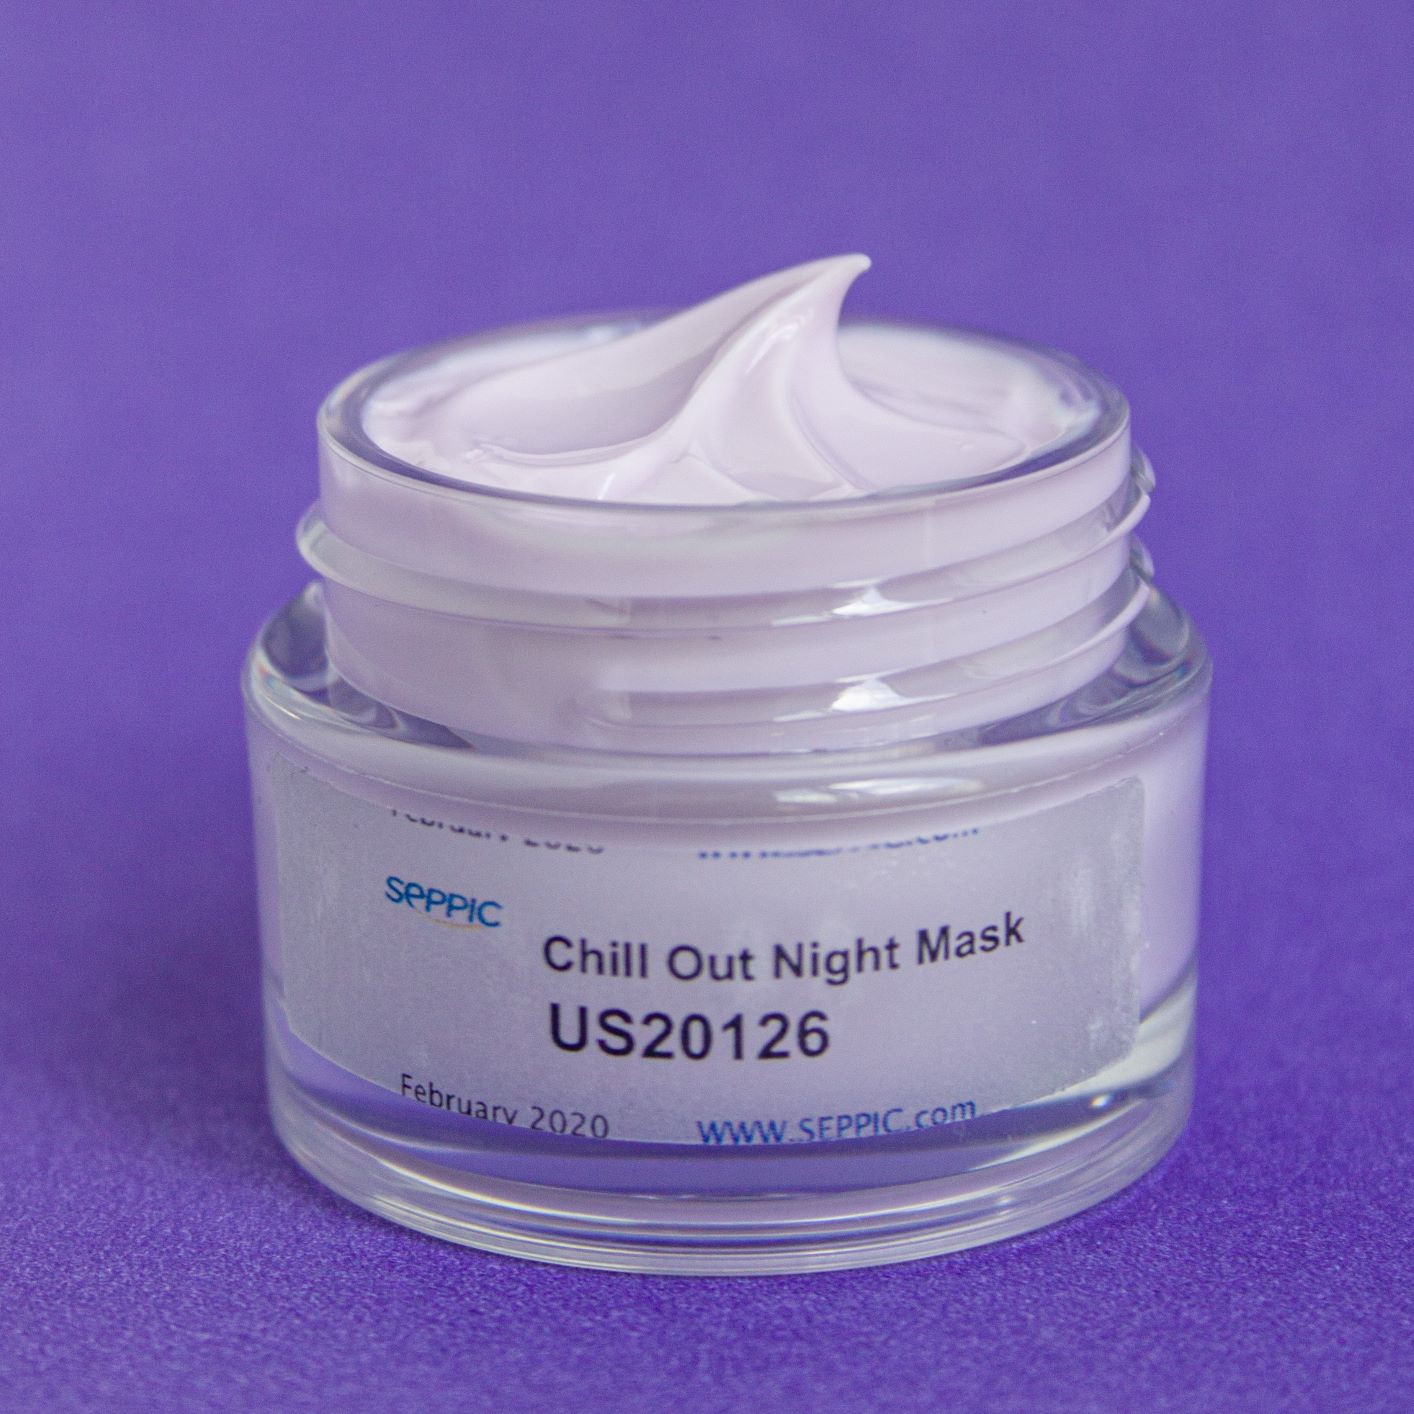 Chill-out Nigh Mask